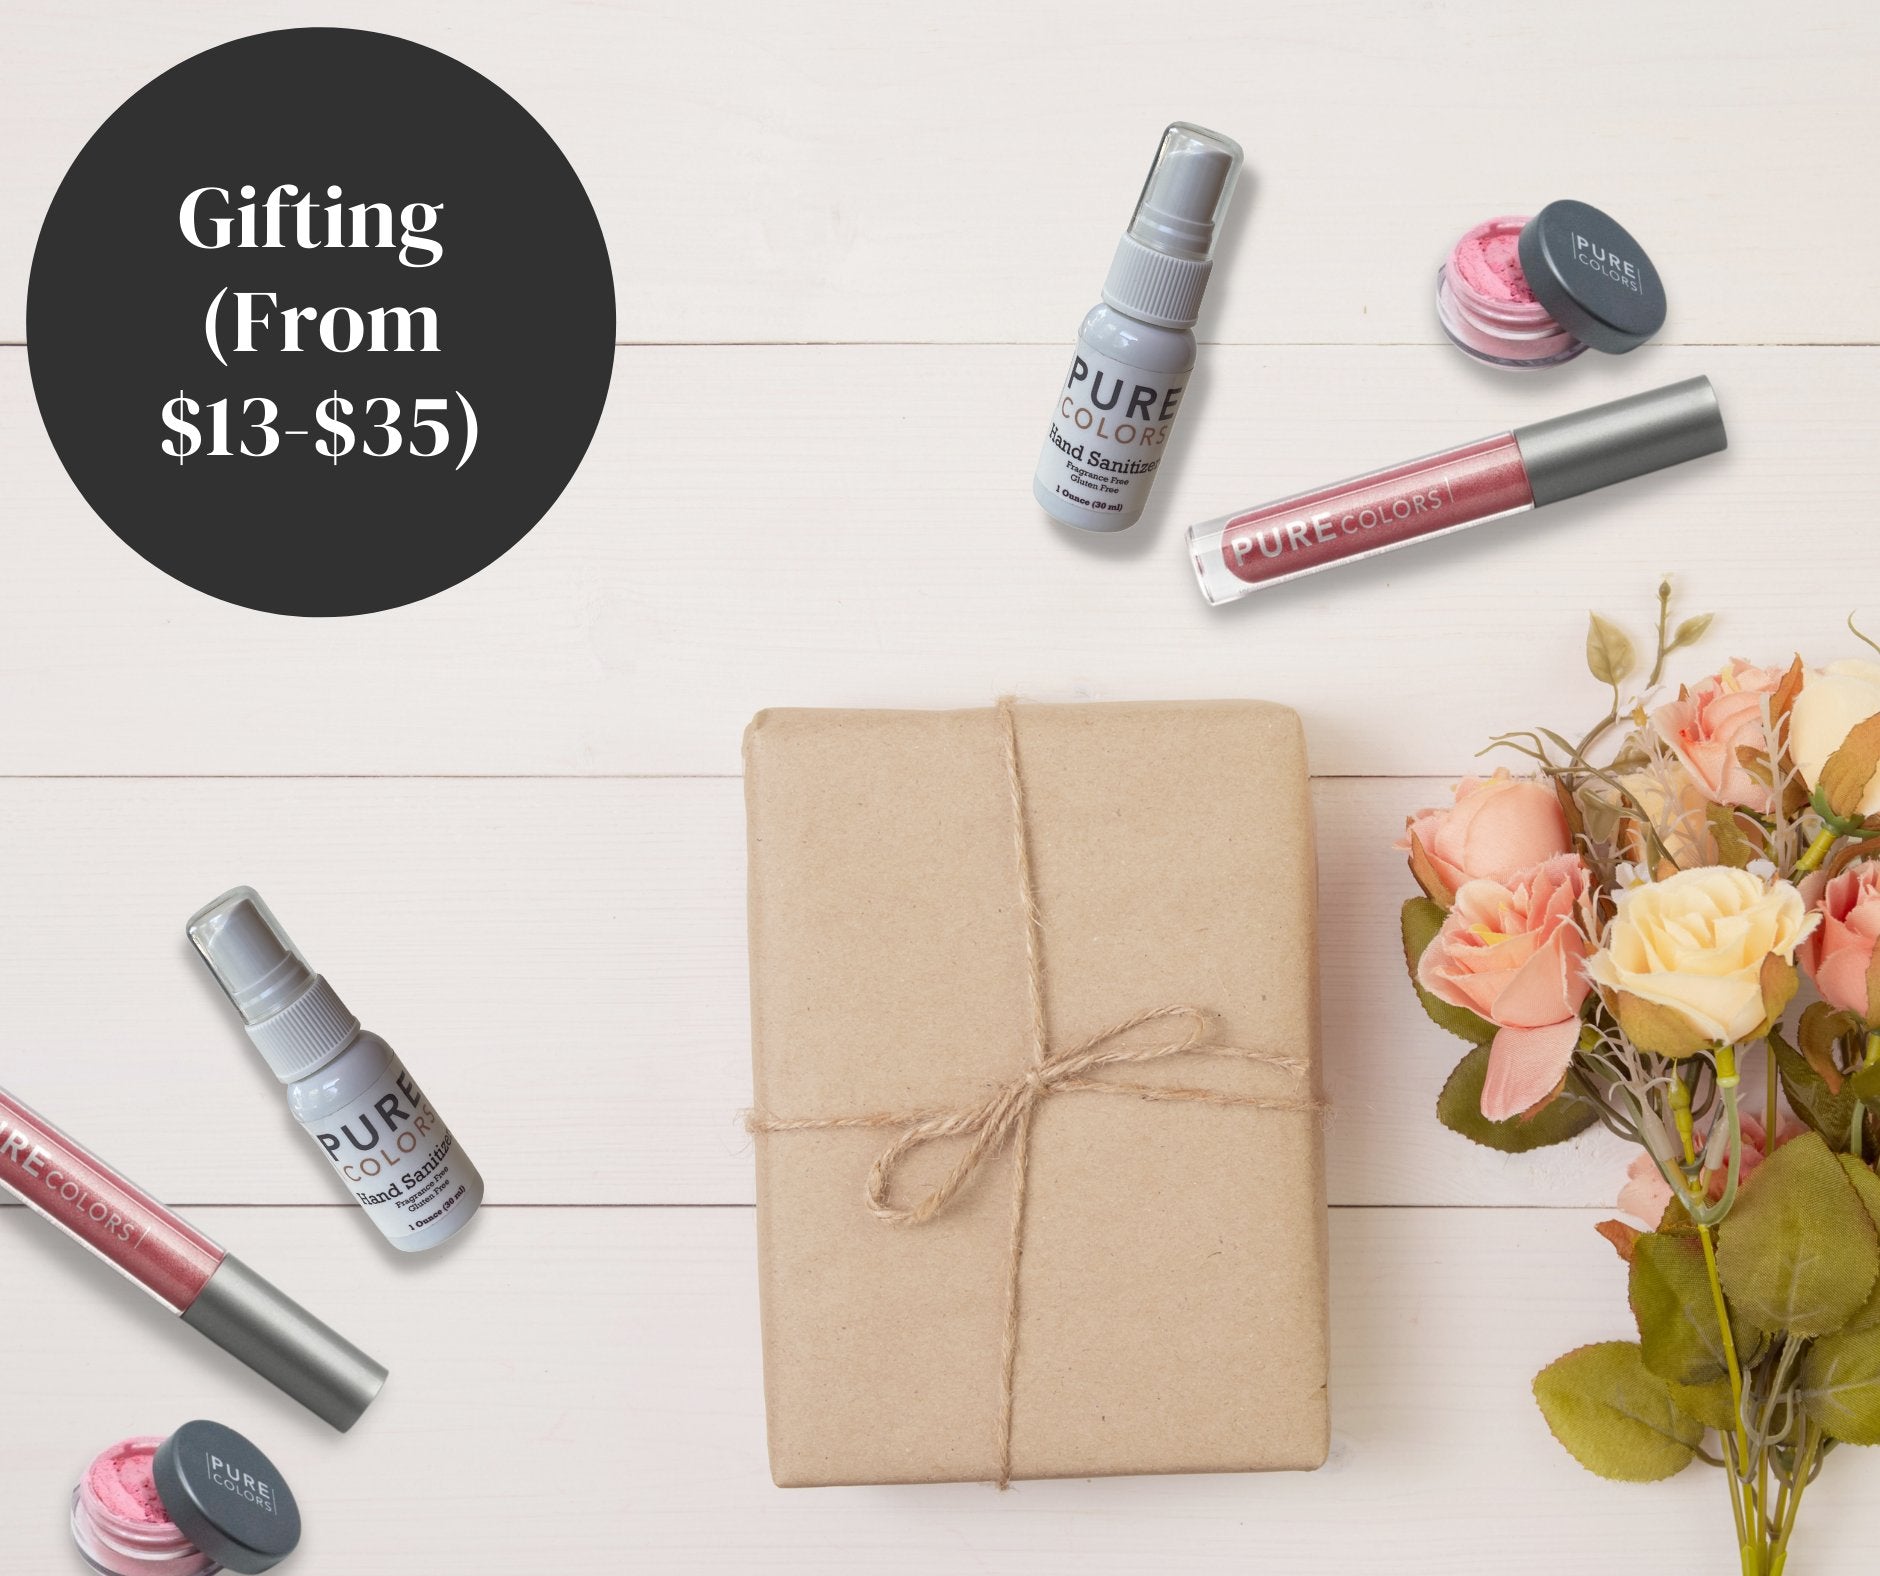 Gifts From $13-$35